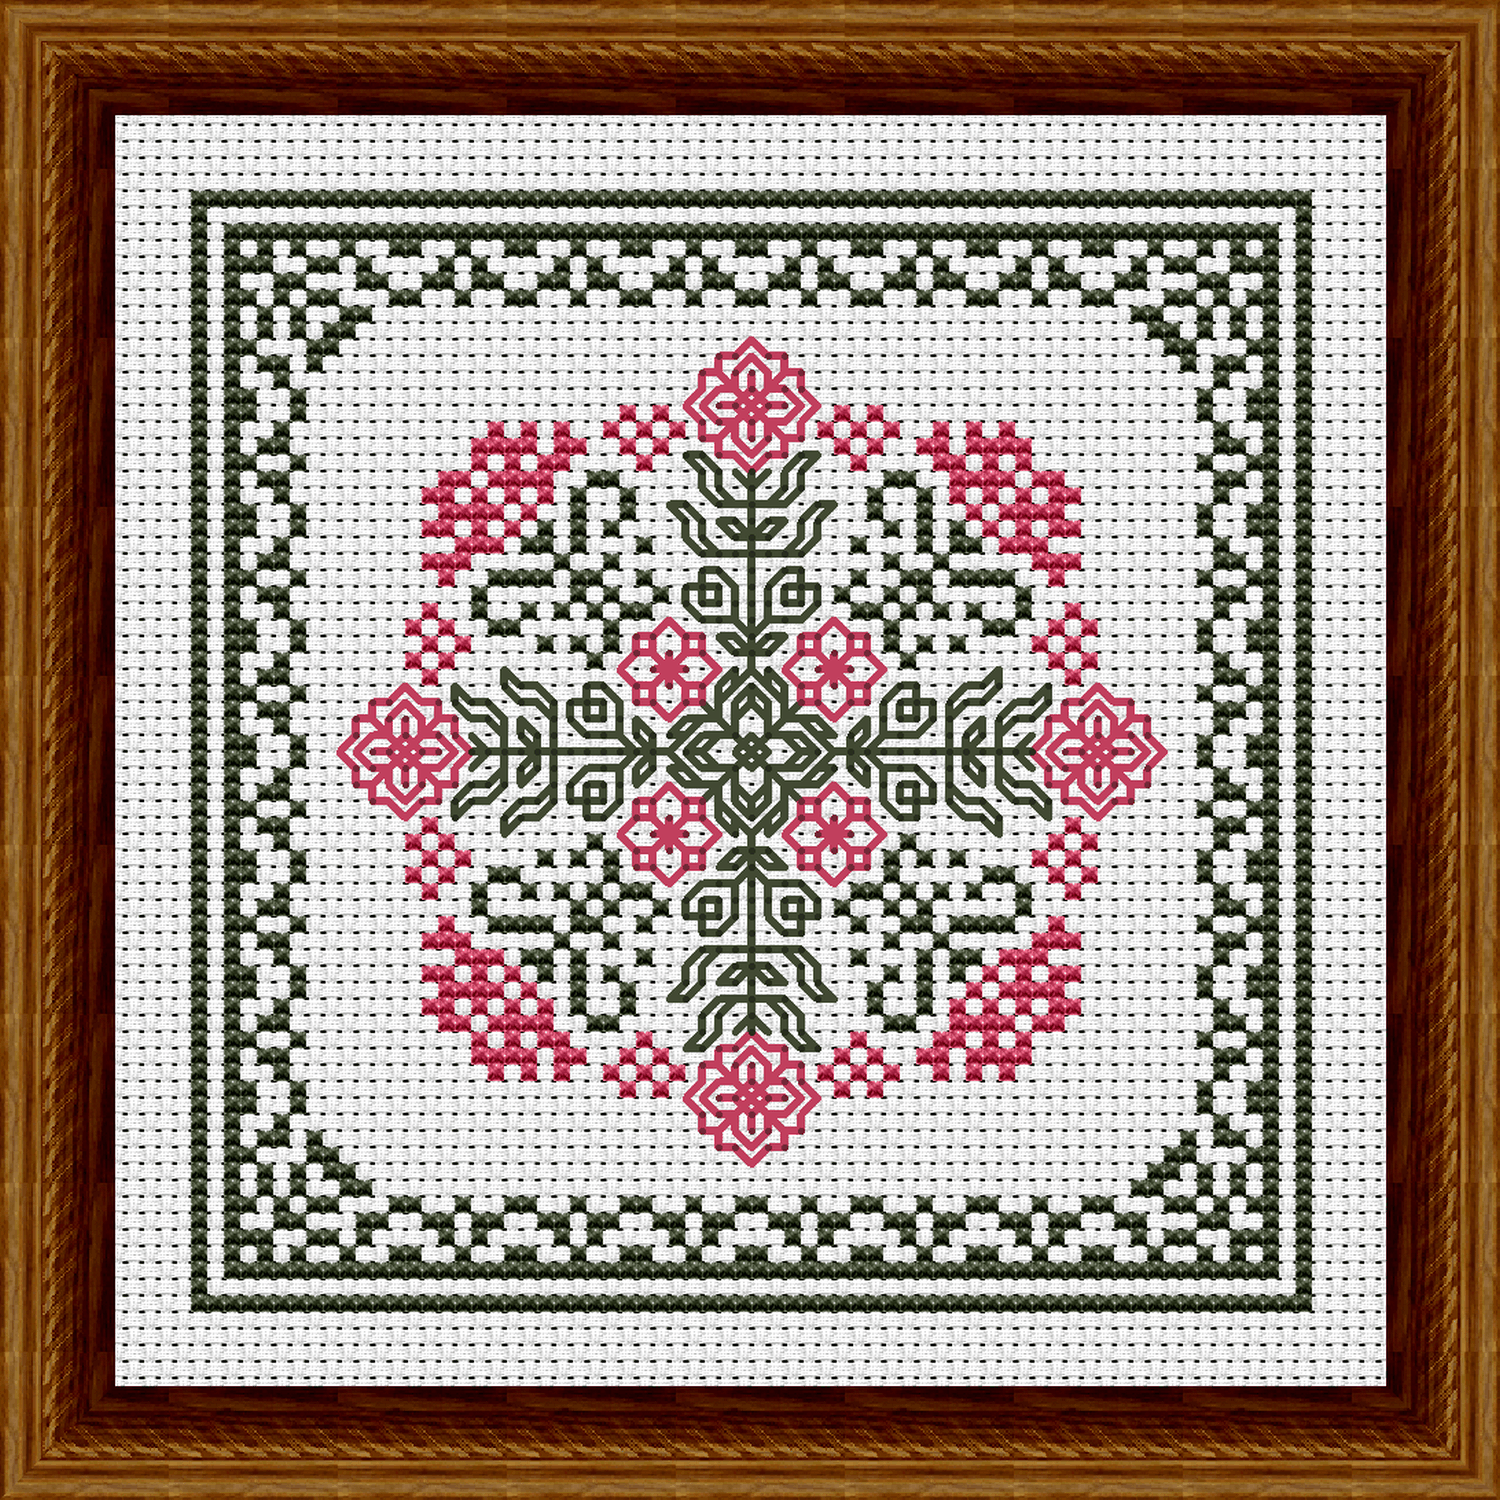 January Hearts Square with Pink Carnations Cross Stitch Pattern 3500